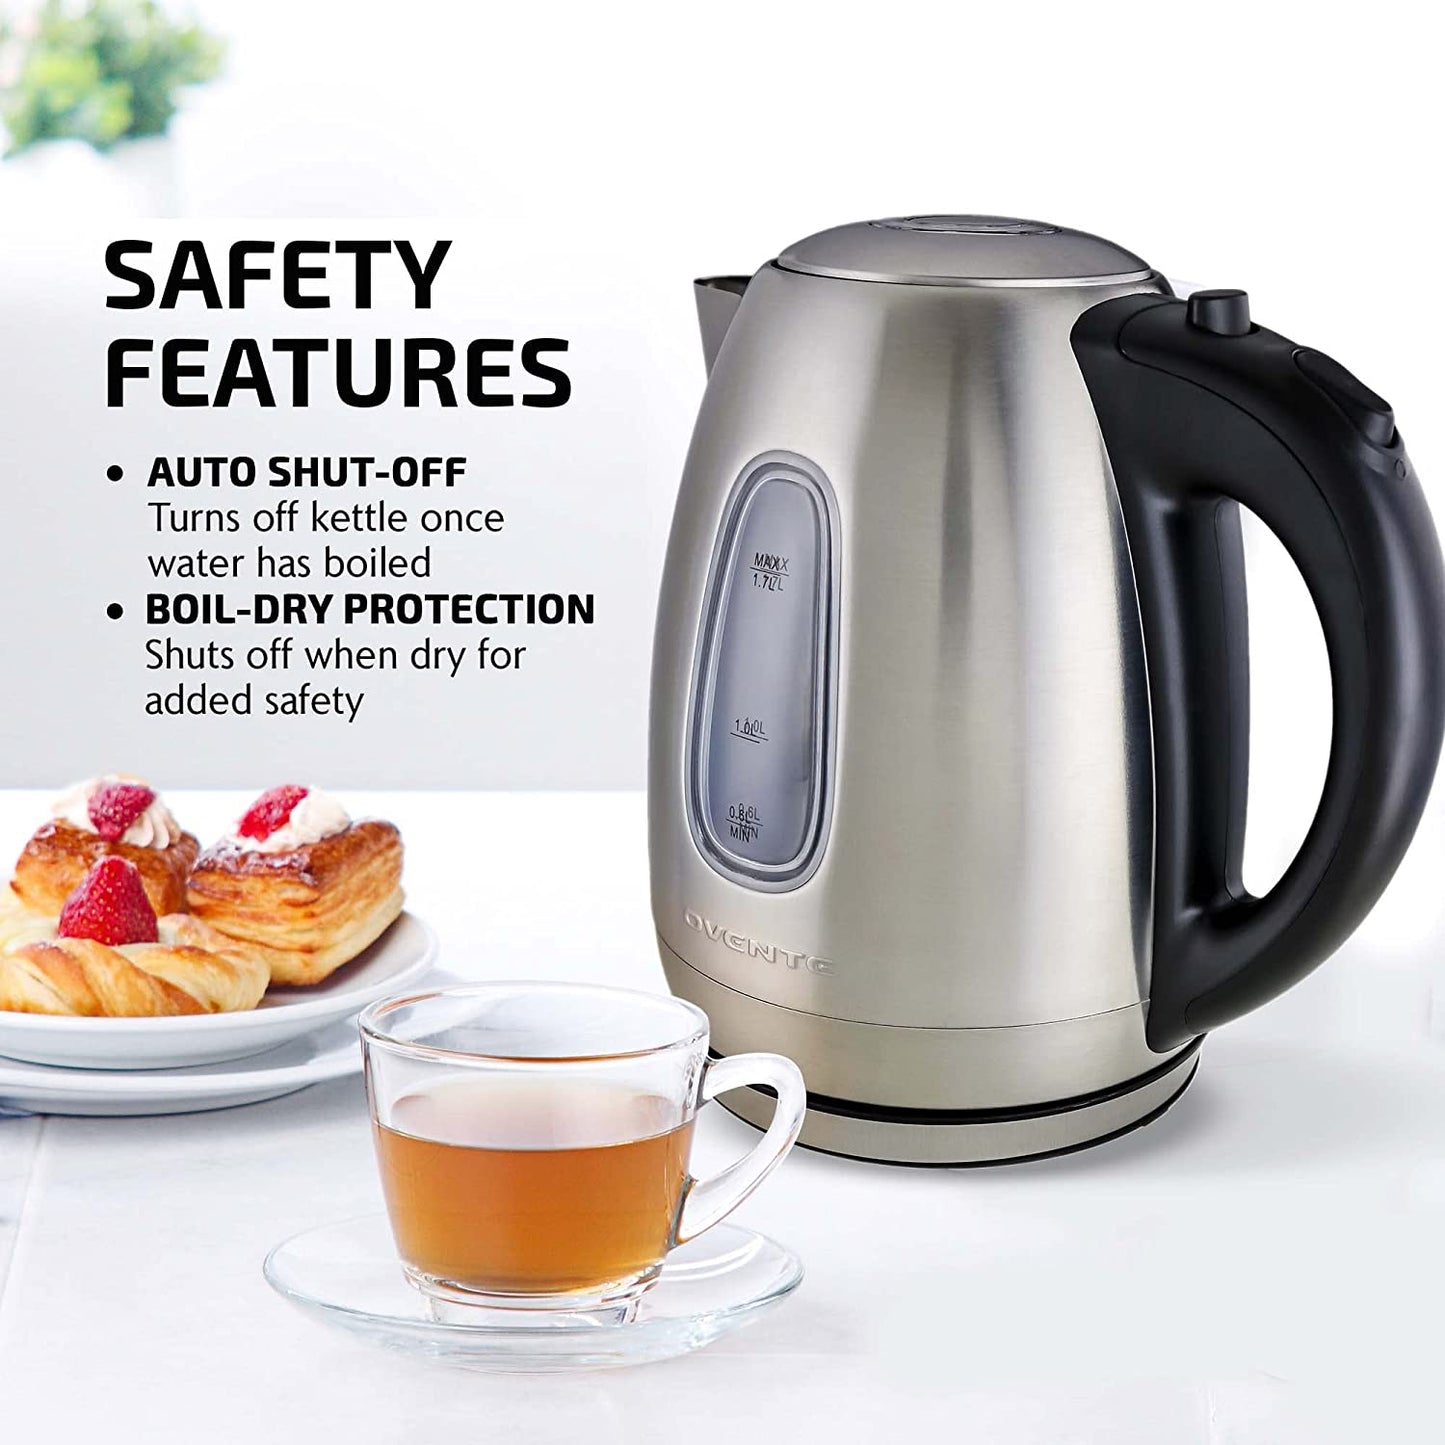 Stainless Steel Fast, Portable Electric Hot Water Kettle for Tea and Coffee, 1.7-Liter